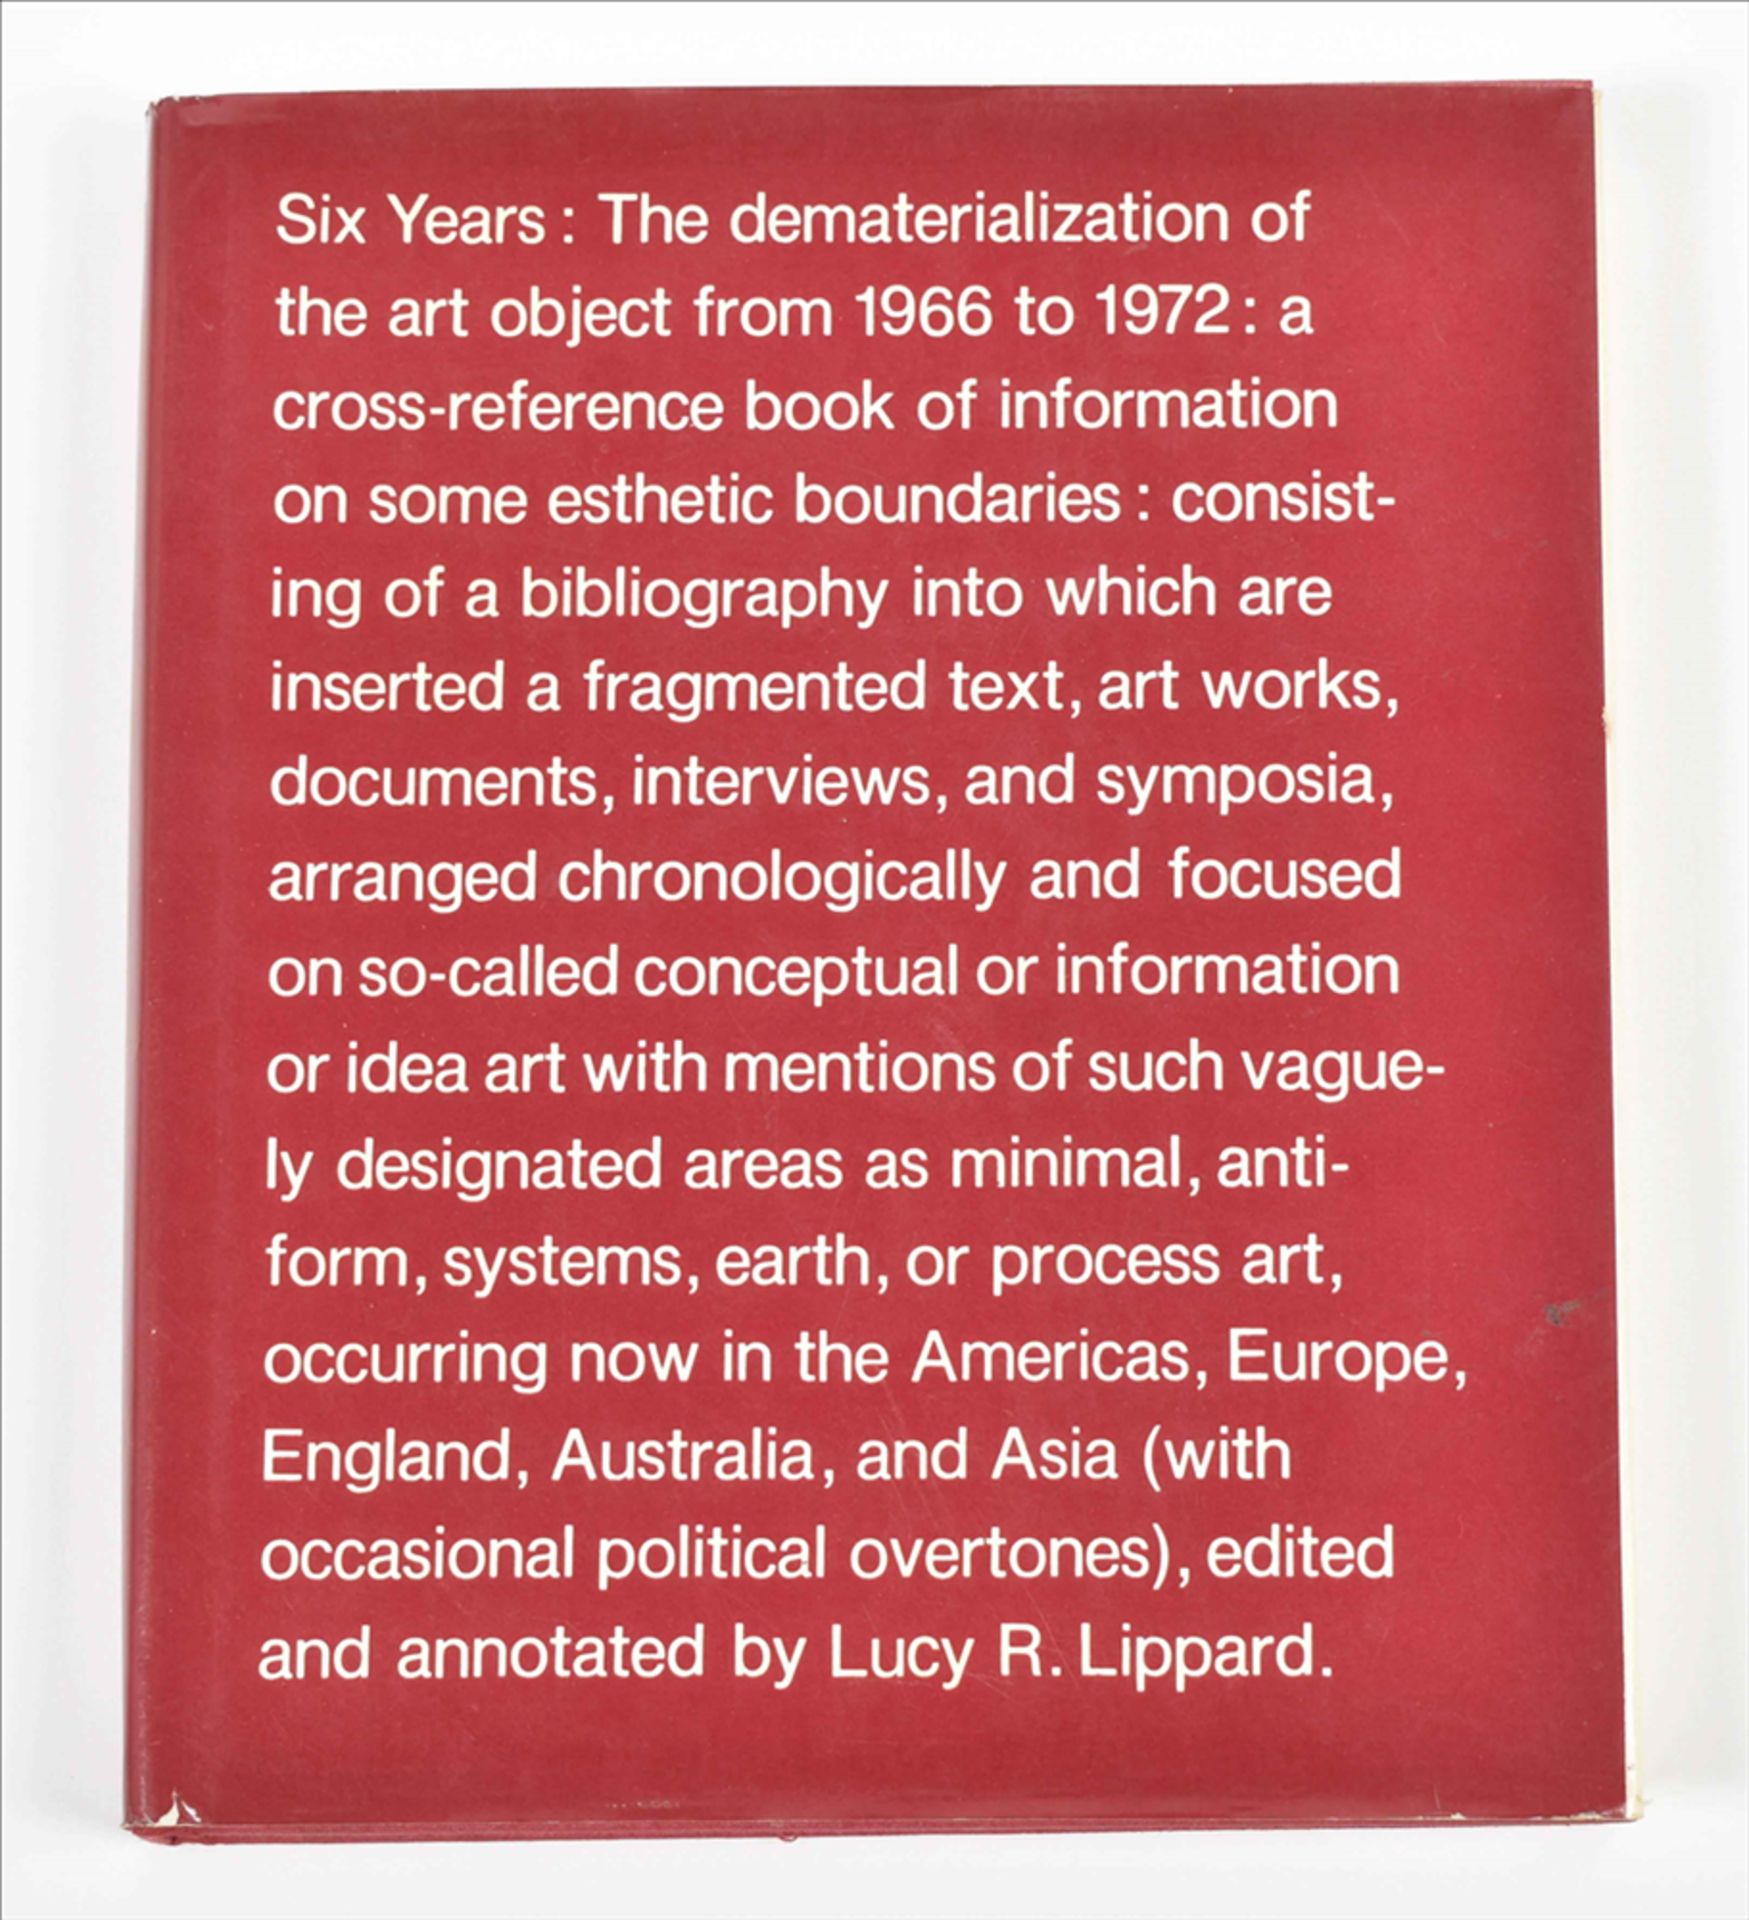 Lucy R. Lippard, Six Years: The dematerialization of the art object